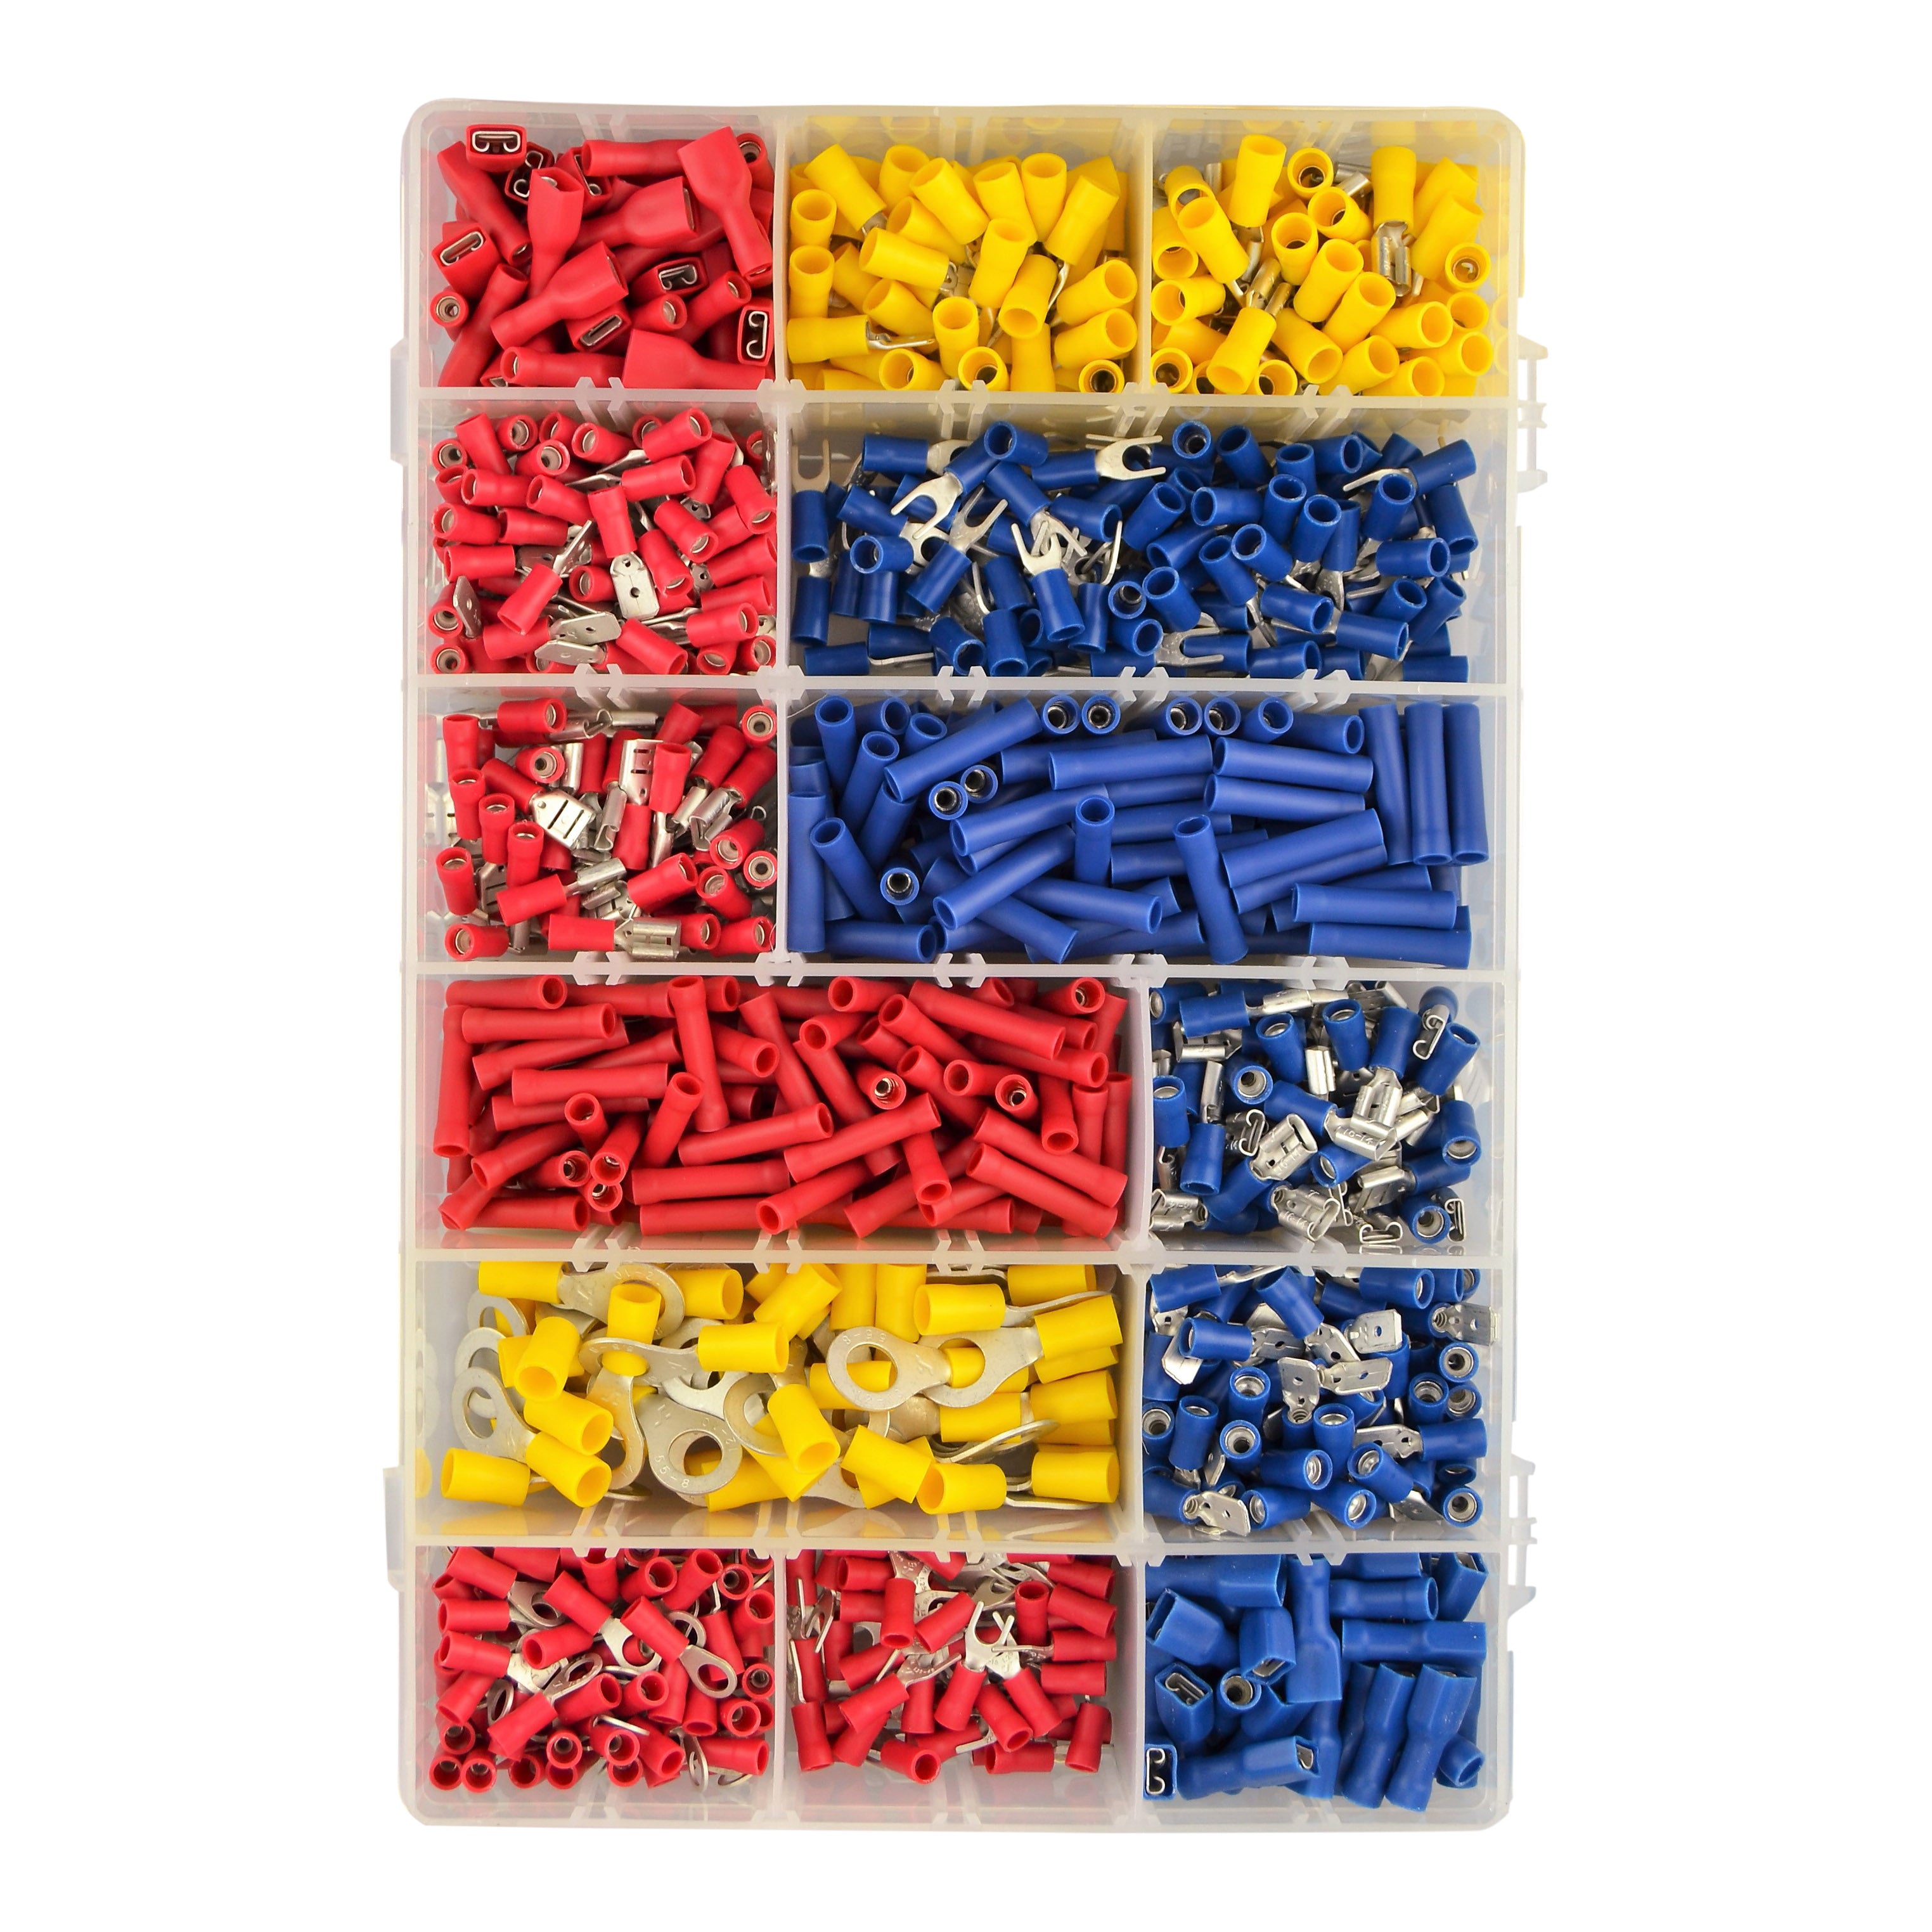 Red, Blue & Yellow Pre-Insulated Crimp Terminal Assortment Kit - 1,000pcs Total